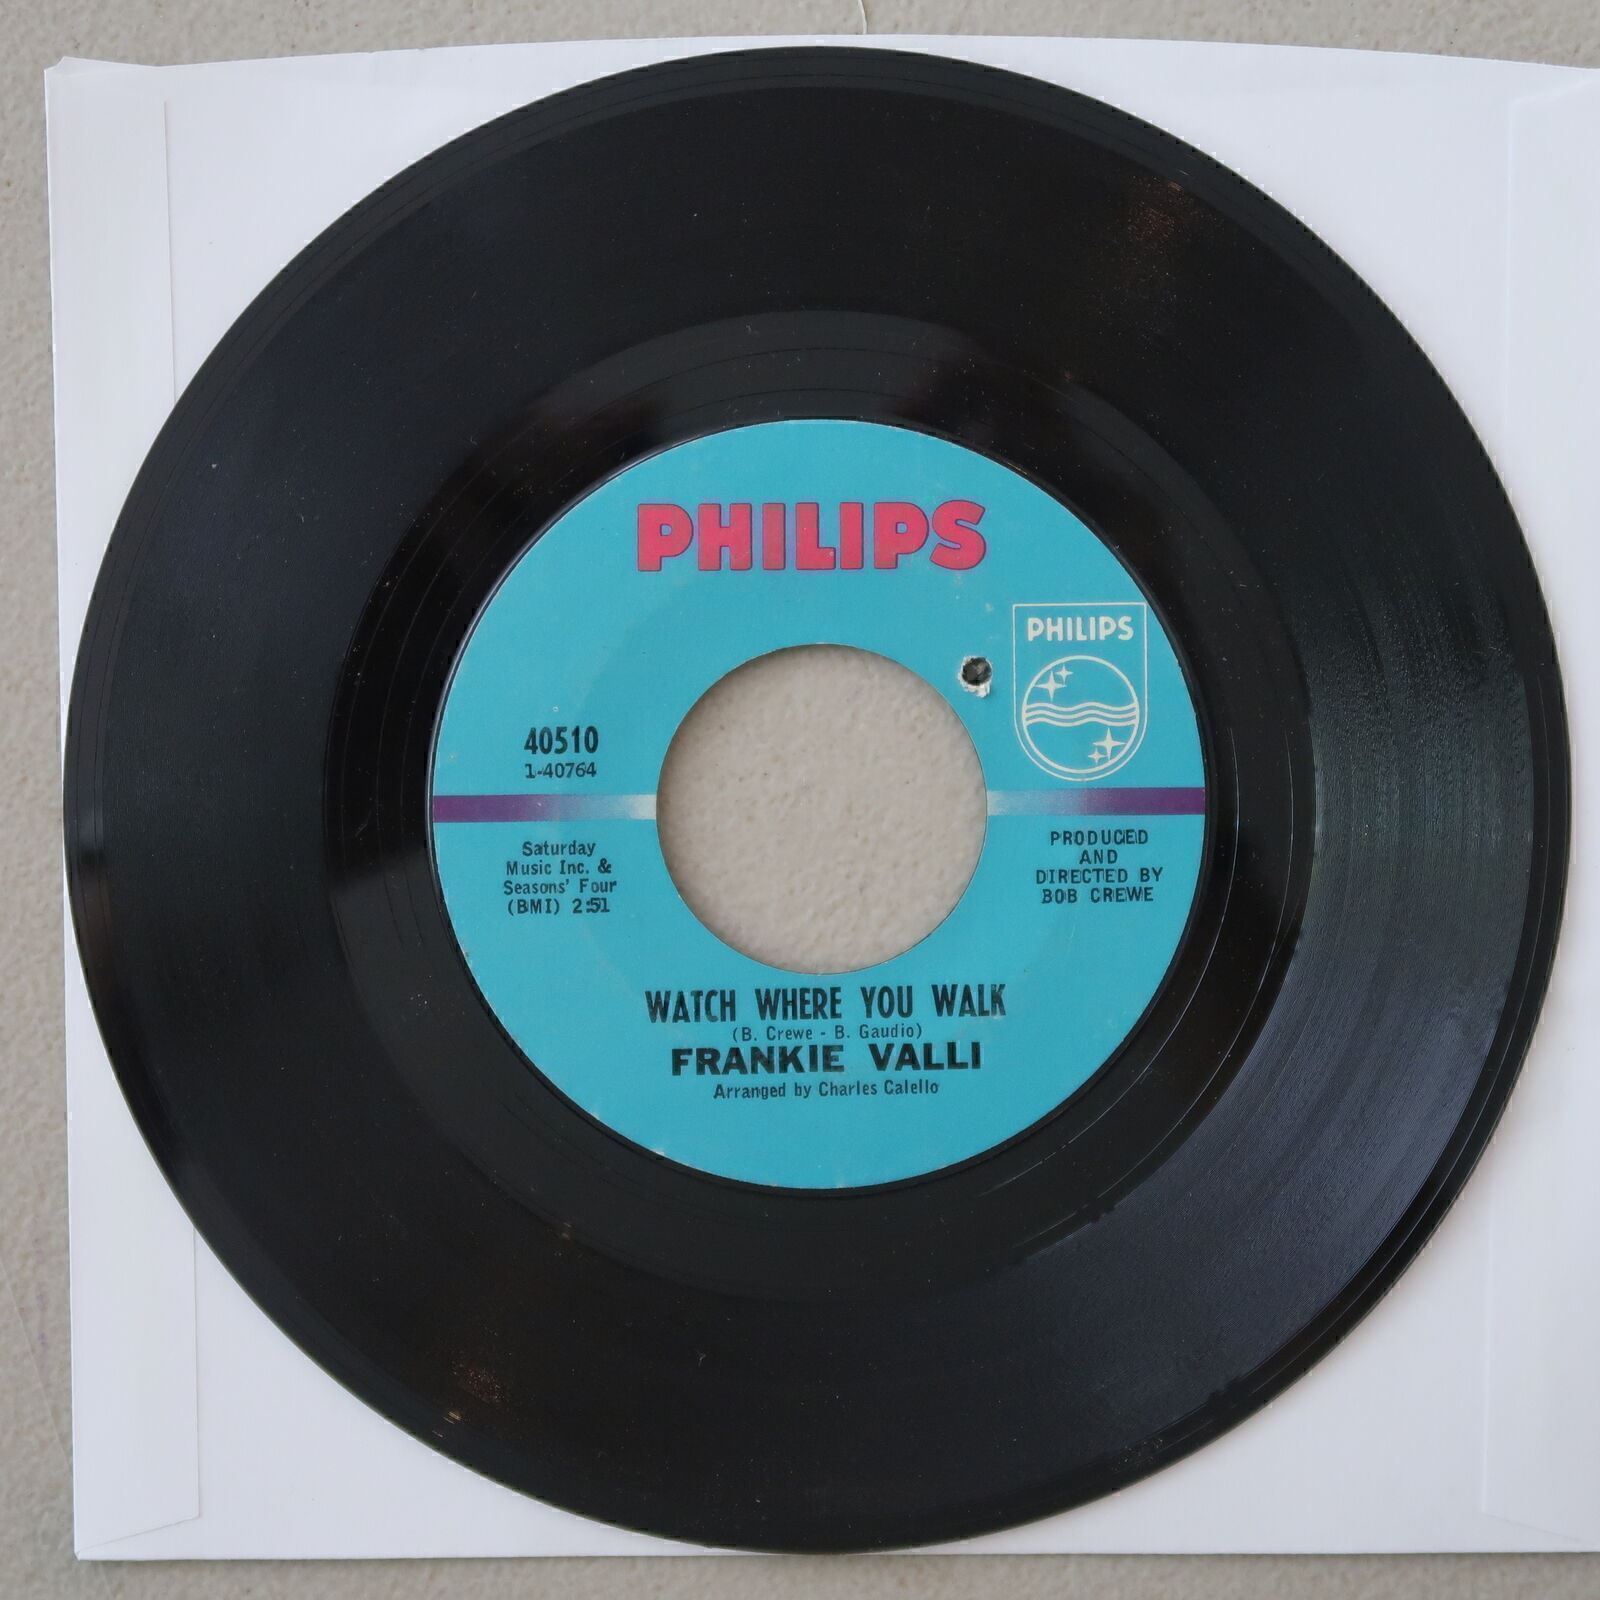 FRANKIE VALLI TO GIVE/WATCH WHERE YOU WALK VINYL 45 PHILIPS VG 16-117